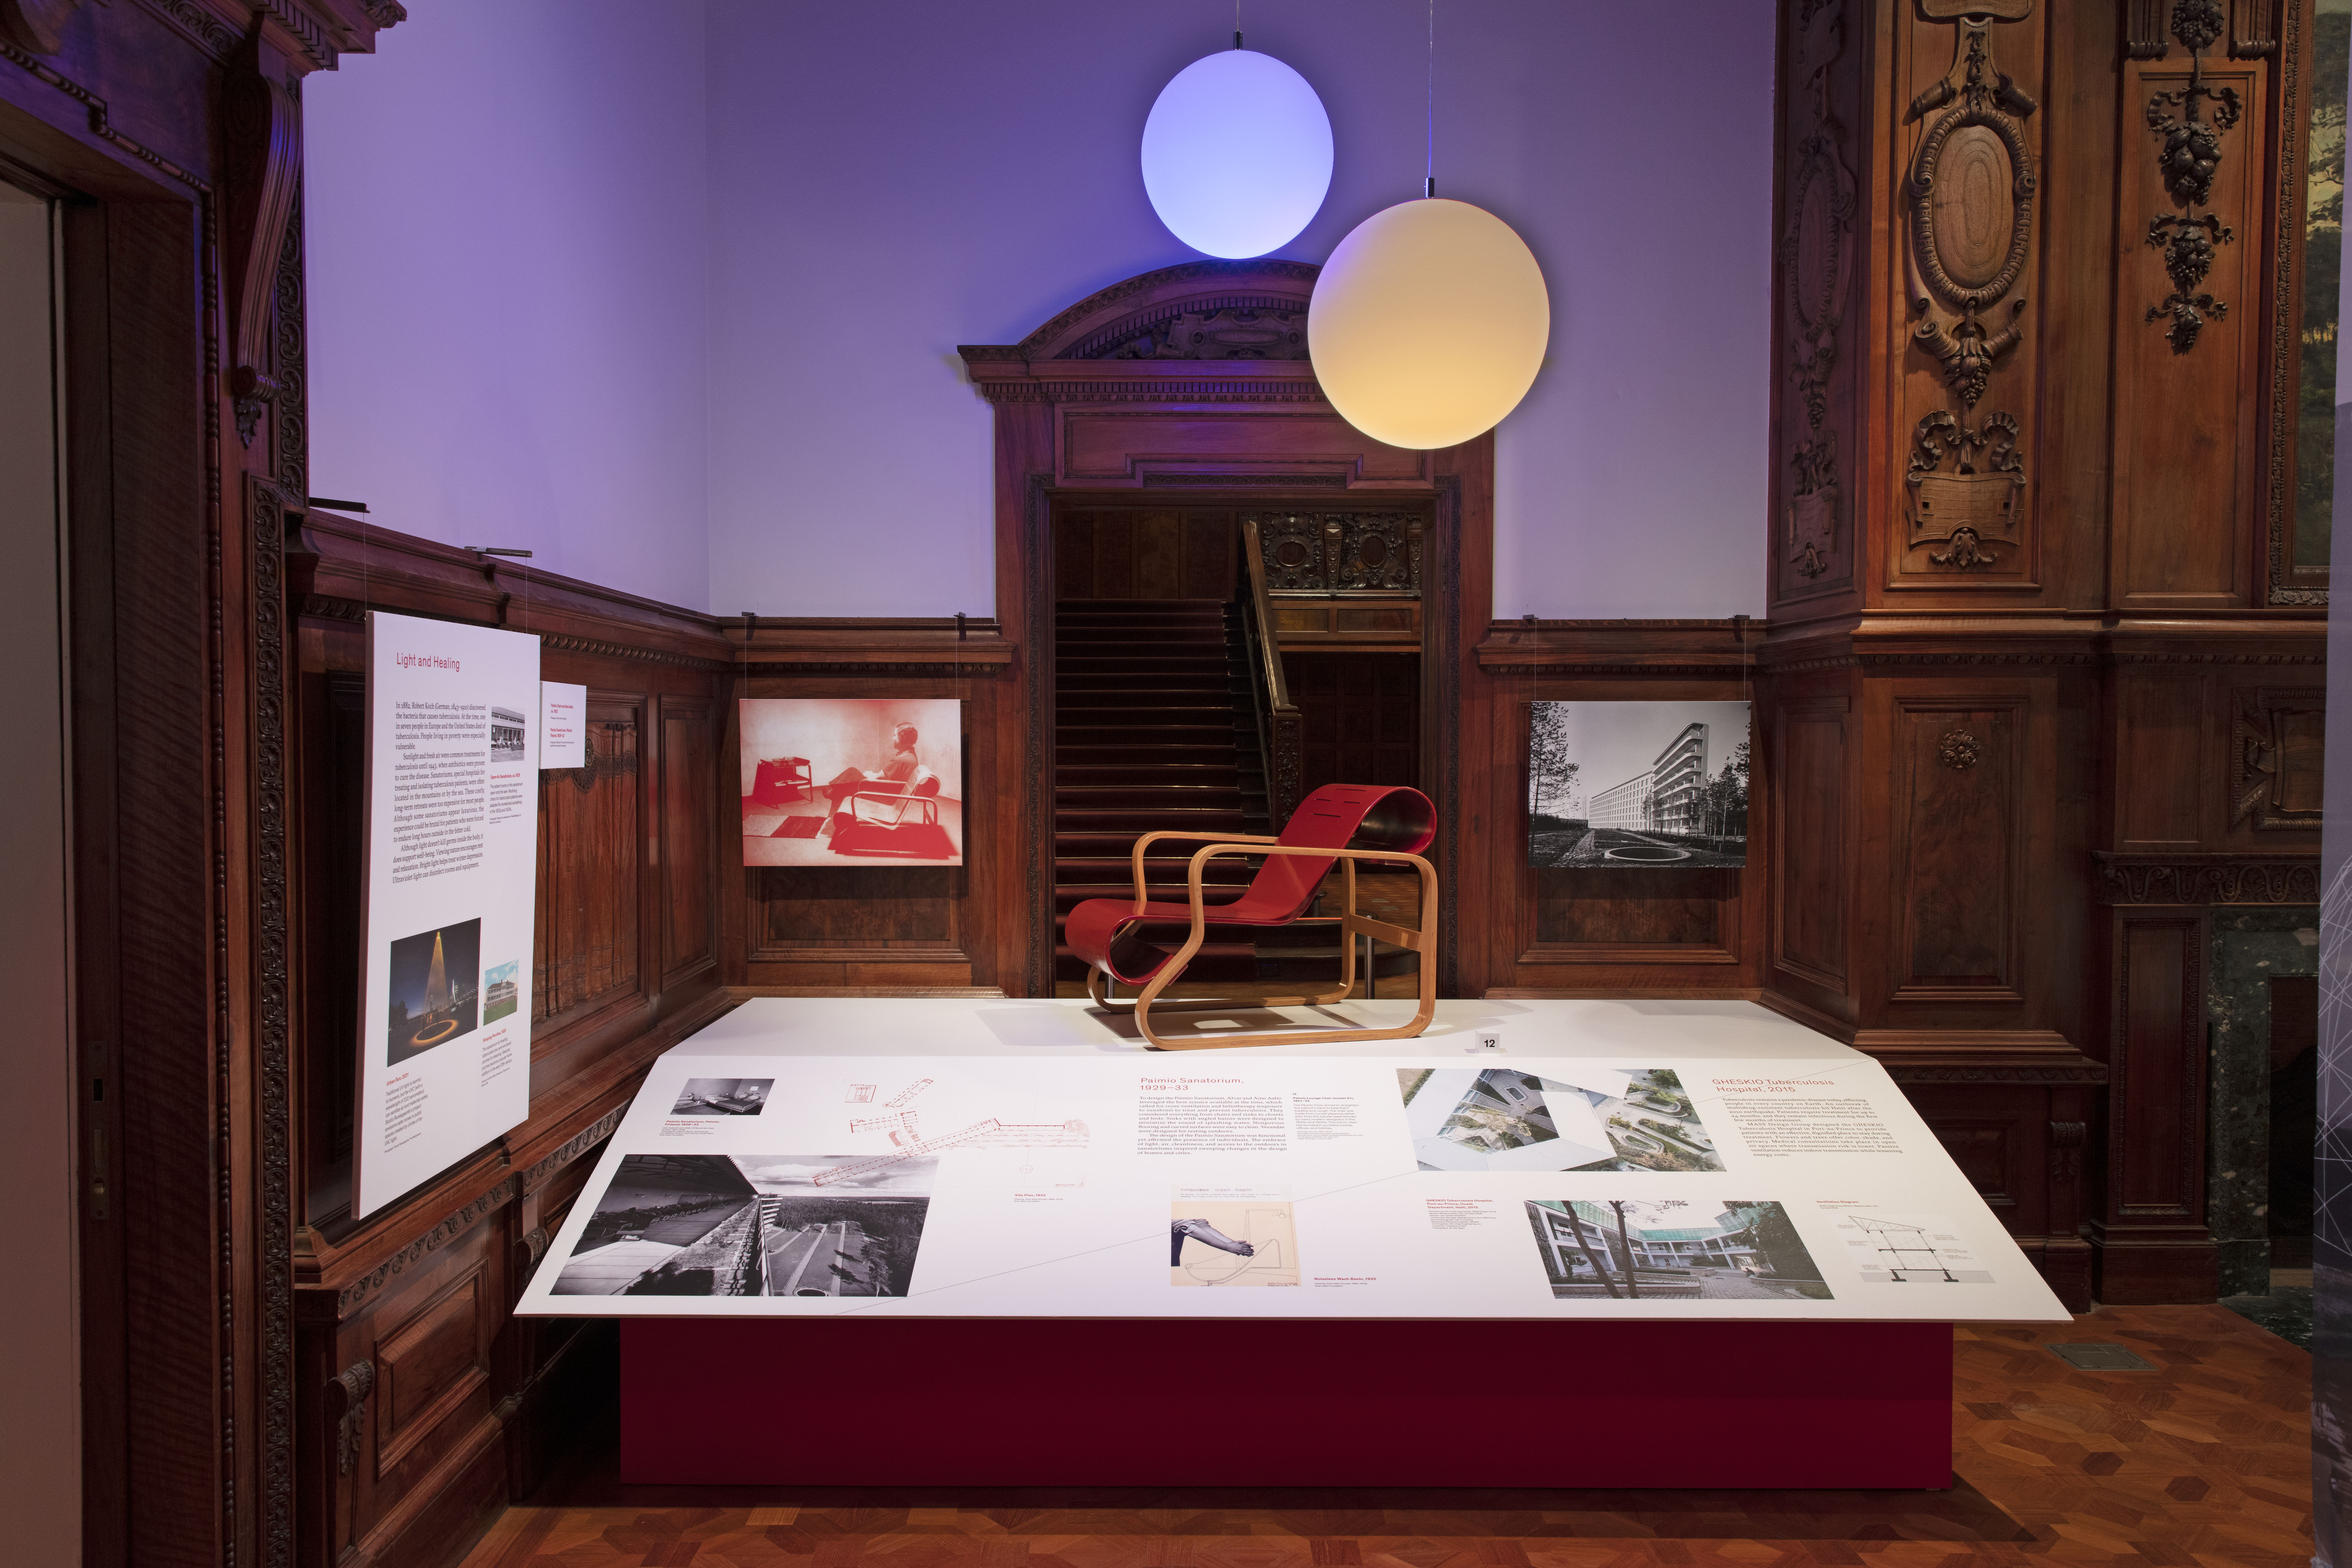 A red-brown armchair with a ribbon-like seat stands side-on on a plinth whose surface is white and filled with photographs and explanatory text. Two orb-like yellow and blue lights hang above, behind are two photographs on either side of a wood-paneled doorway